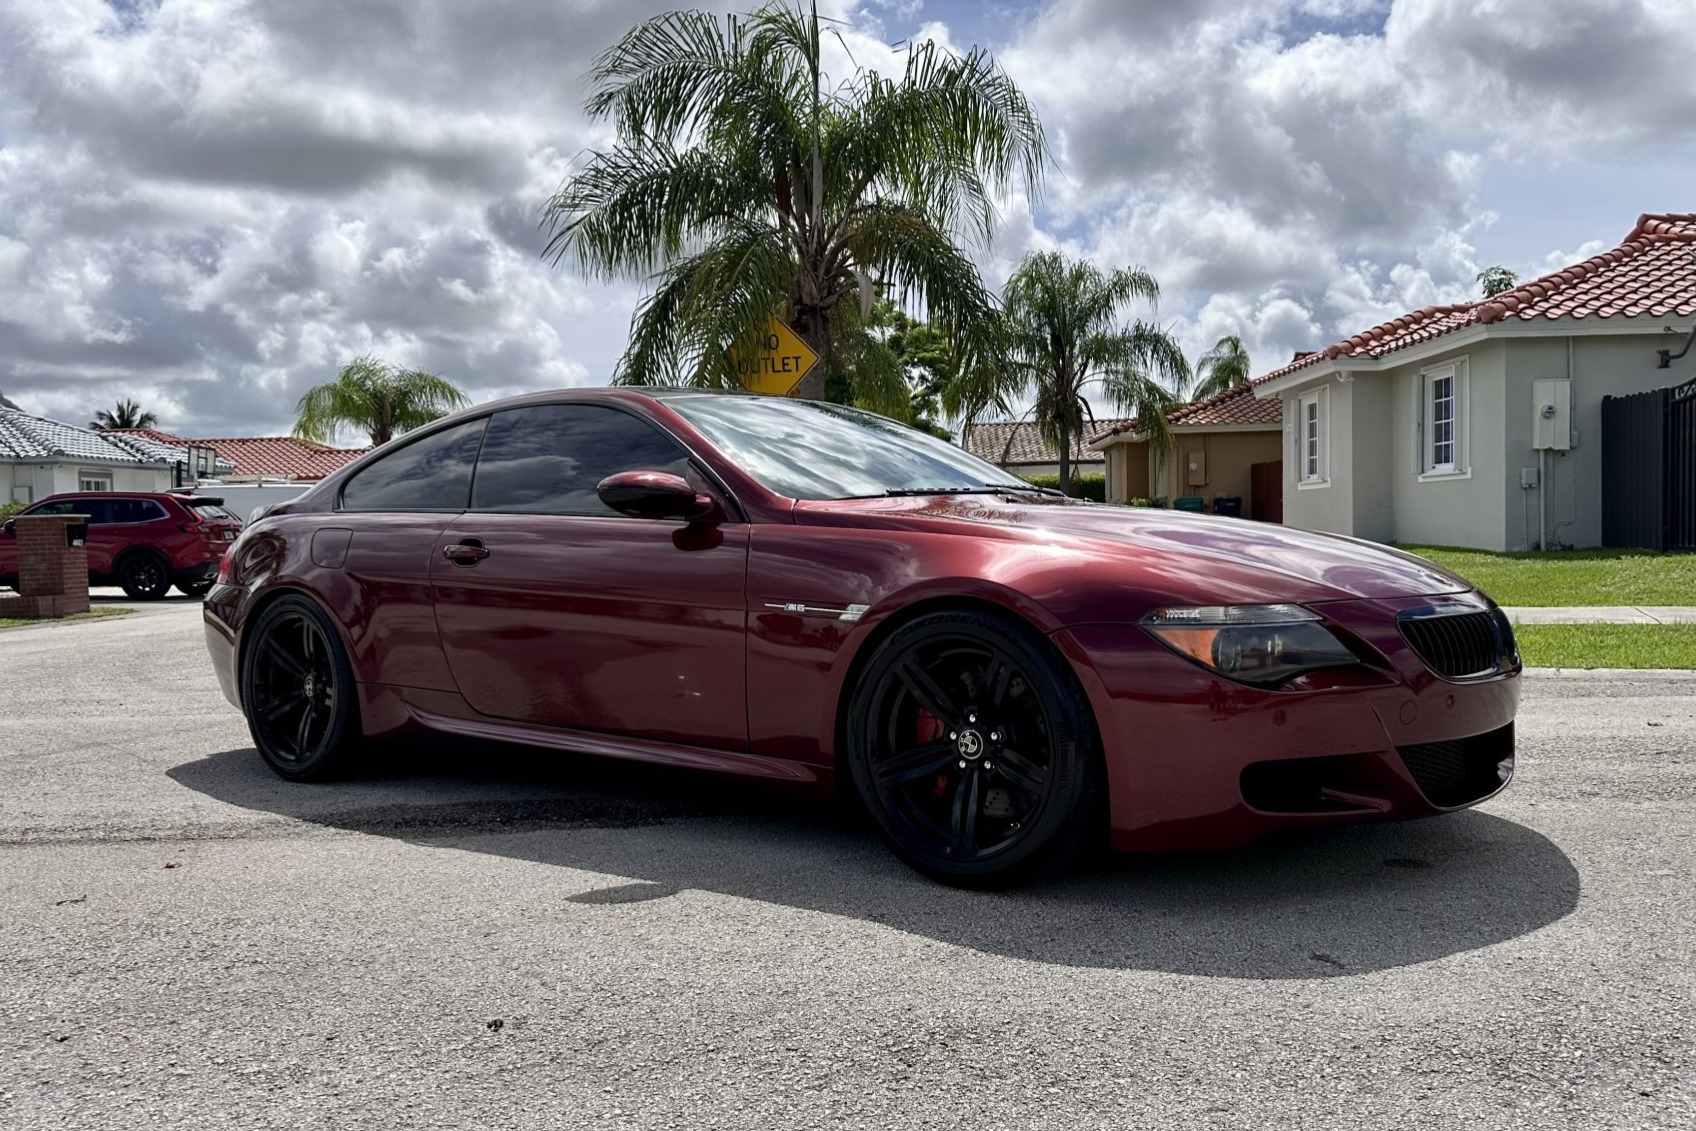 Used 46k-Mile 2007 BMW M6 Coupe Review